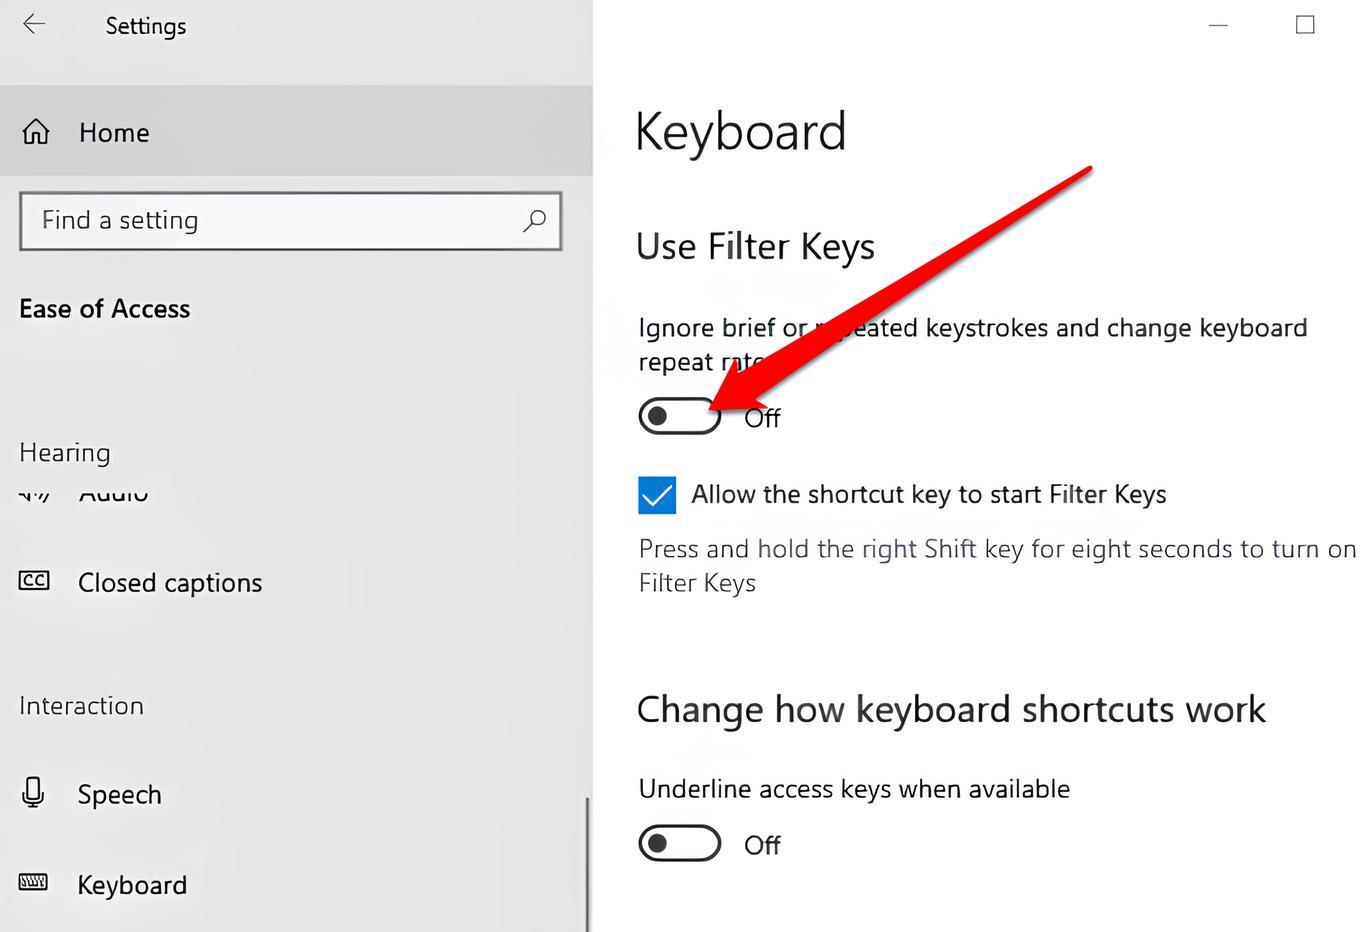 How To Deselect Filter Keys Without A Mouse Pad